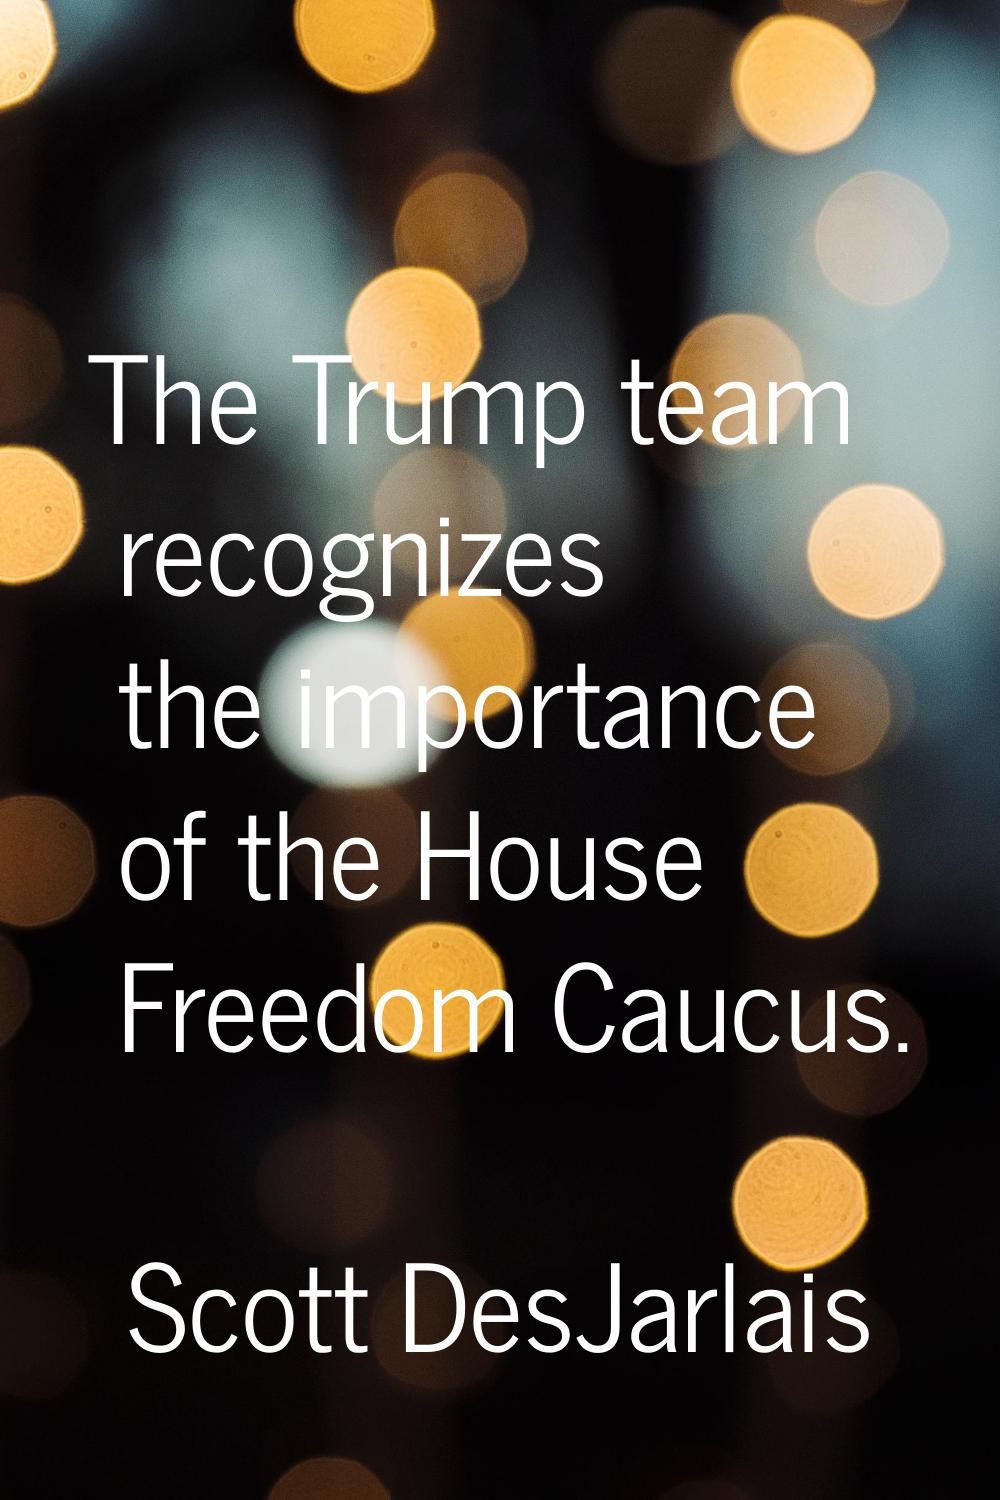 The Trump team recognizes the importance of the House Freedom Caucus.